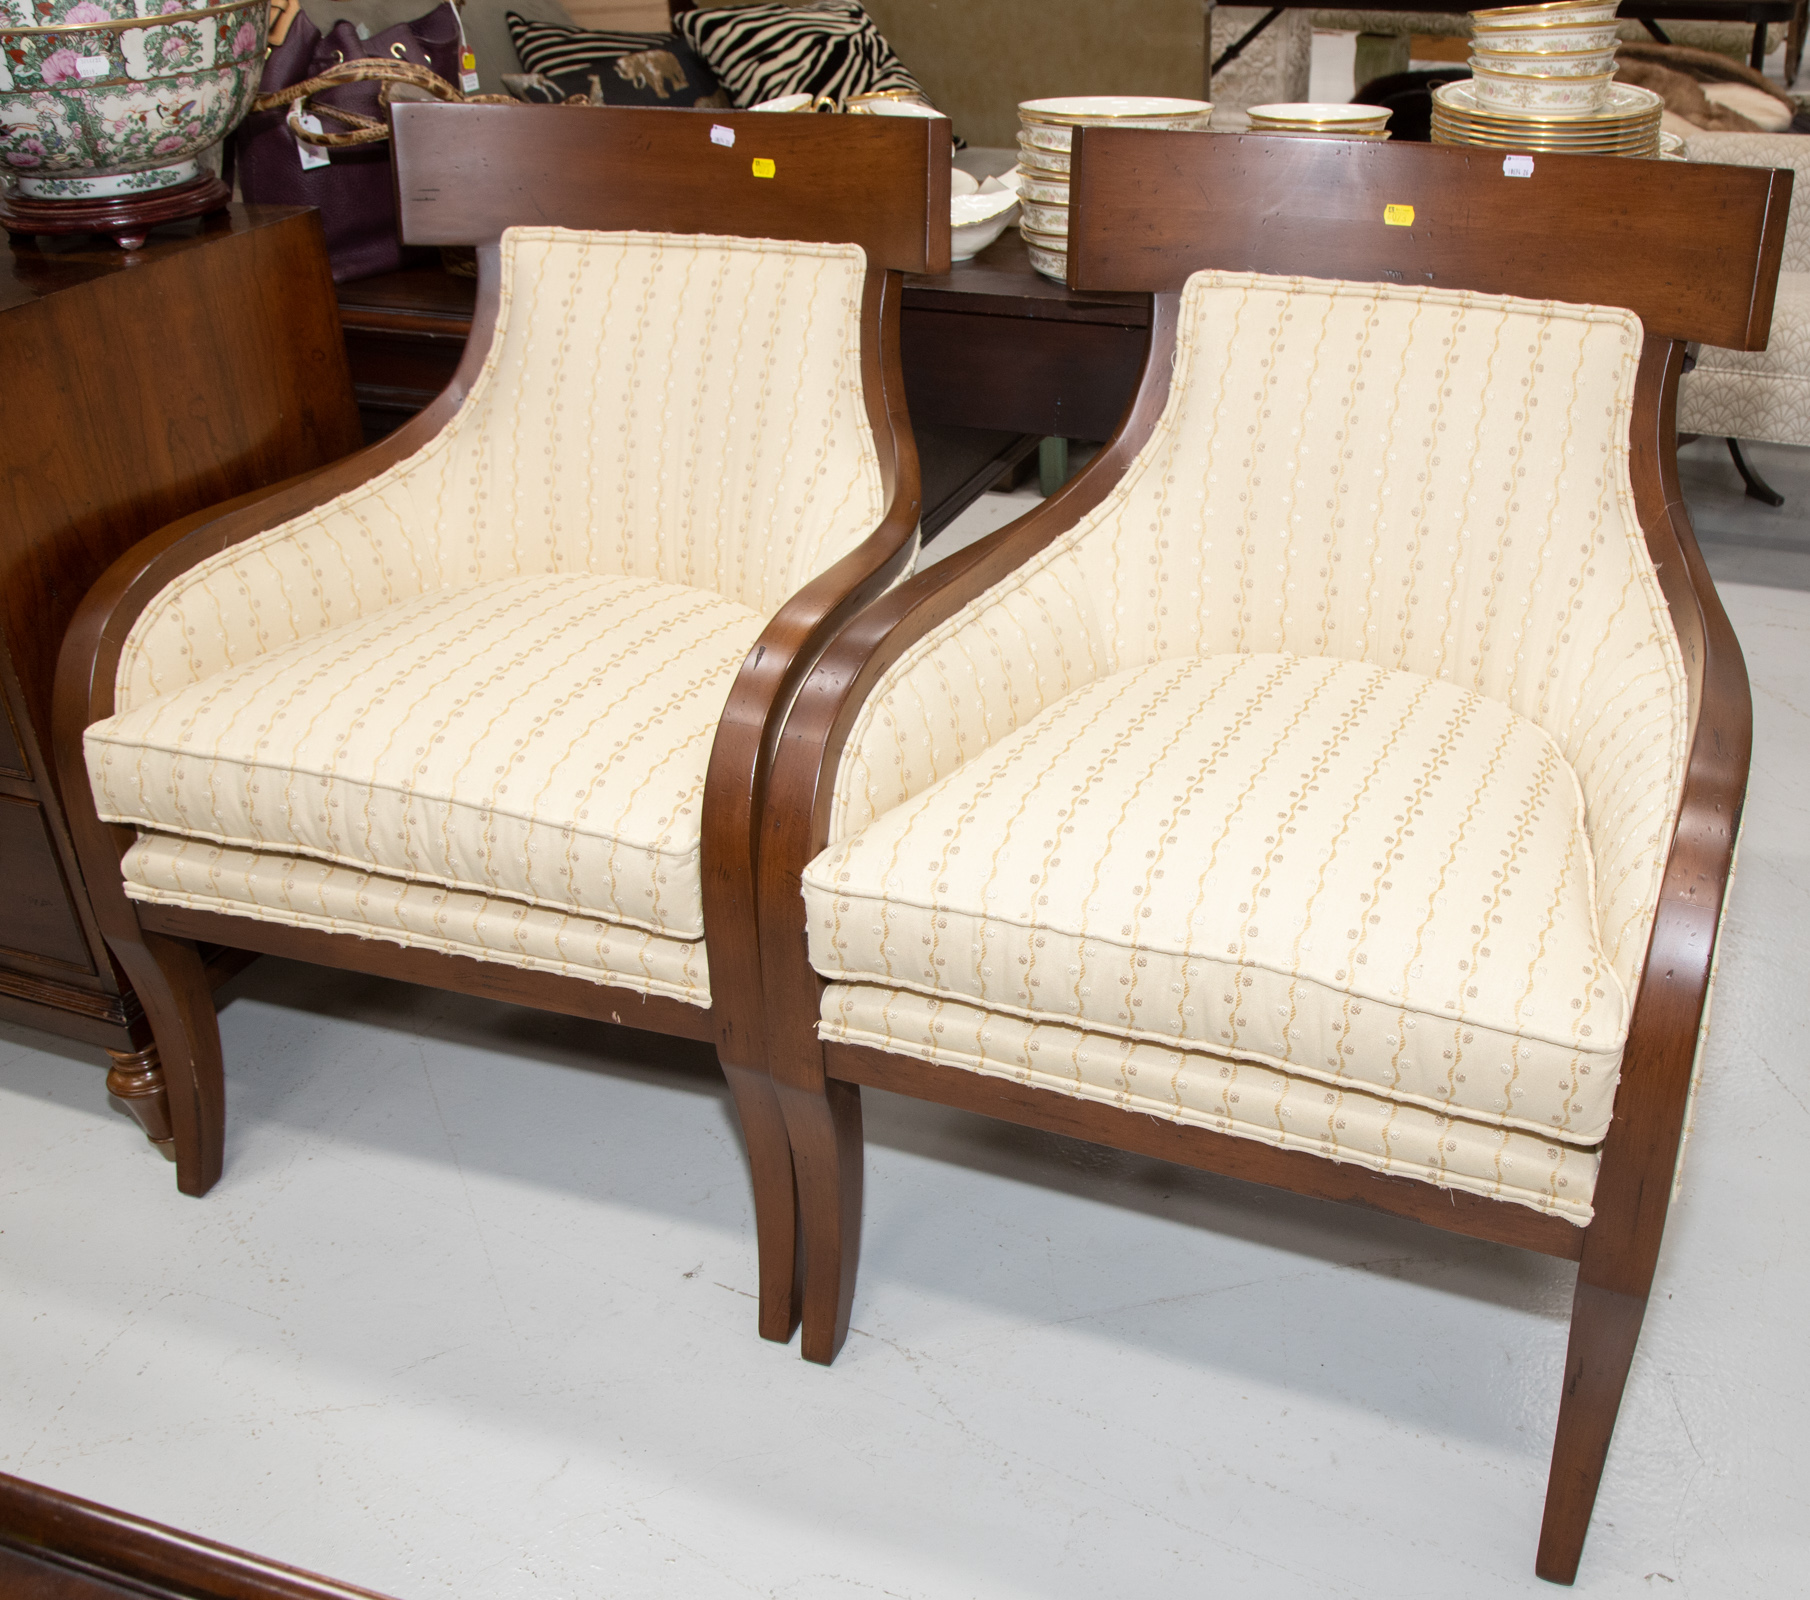 A PAIR OF PEARSON ART DECO LOUNGE